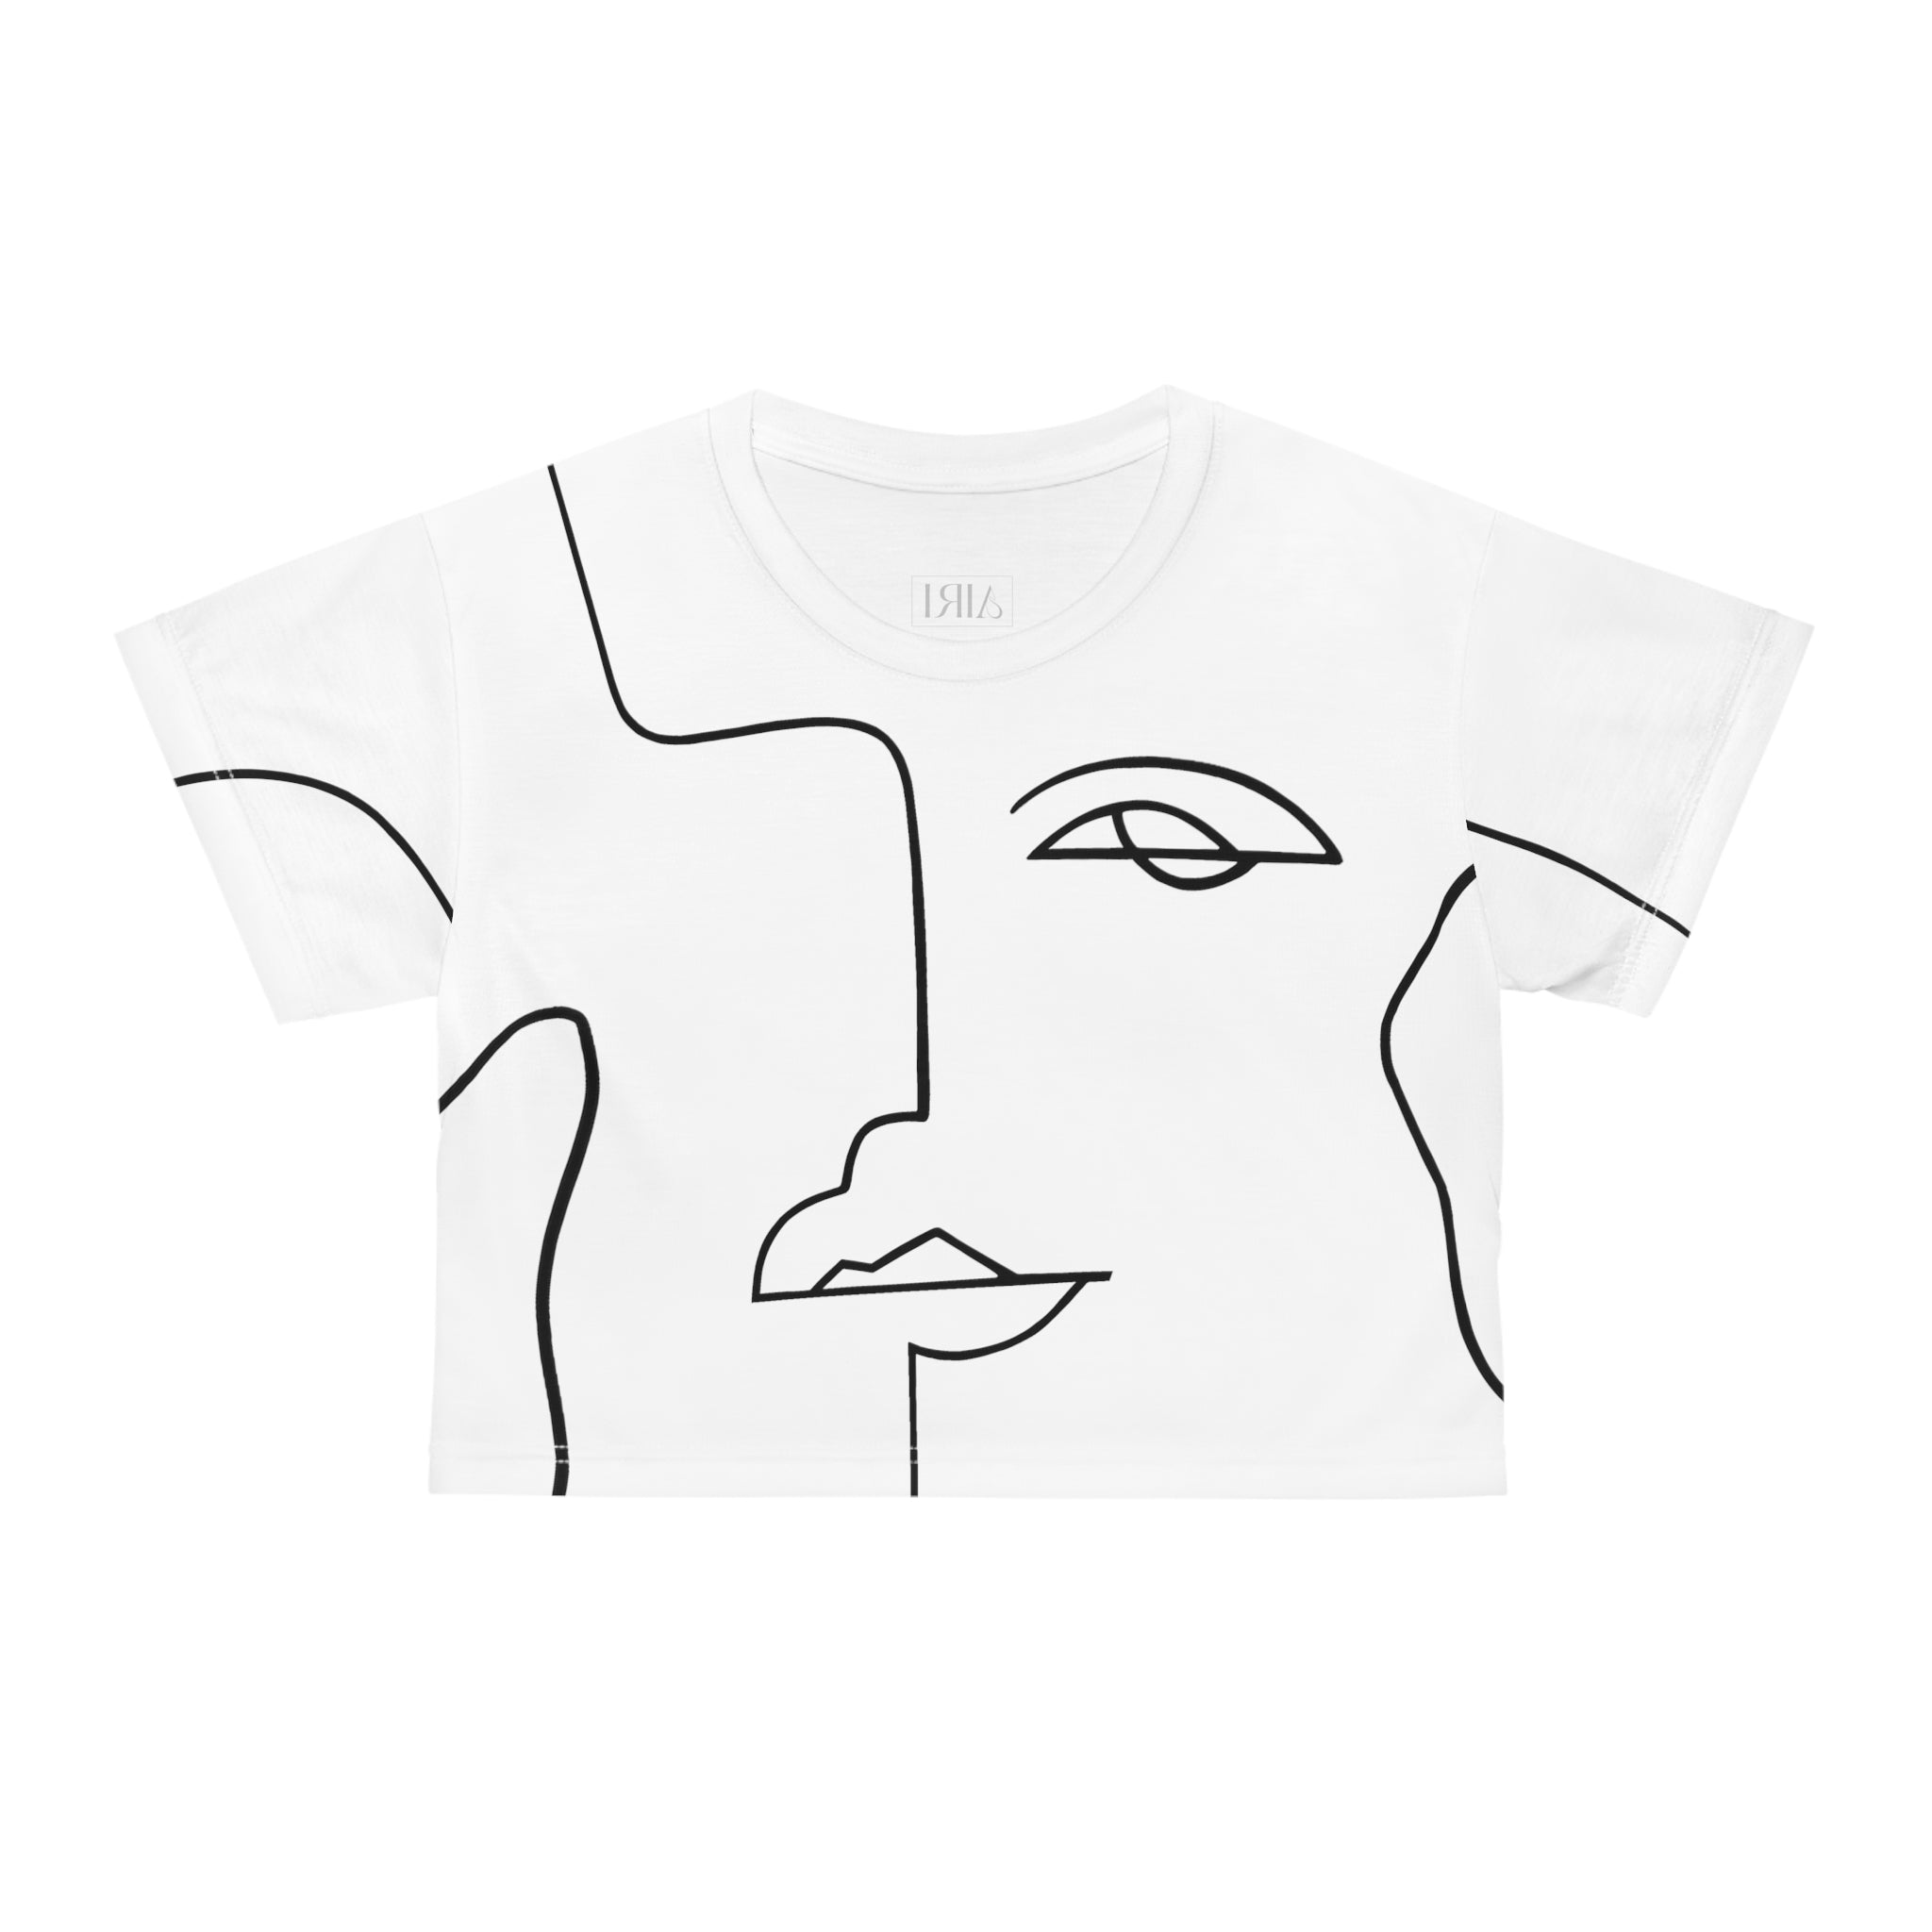 AIRI 1Line Crop Top | Abstract Figure Black and White One Line Art Design